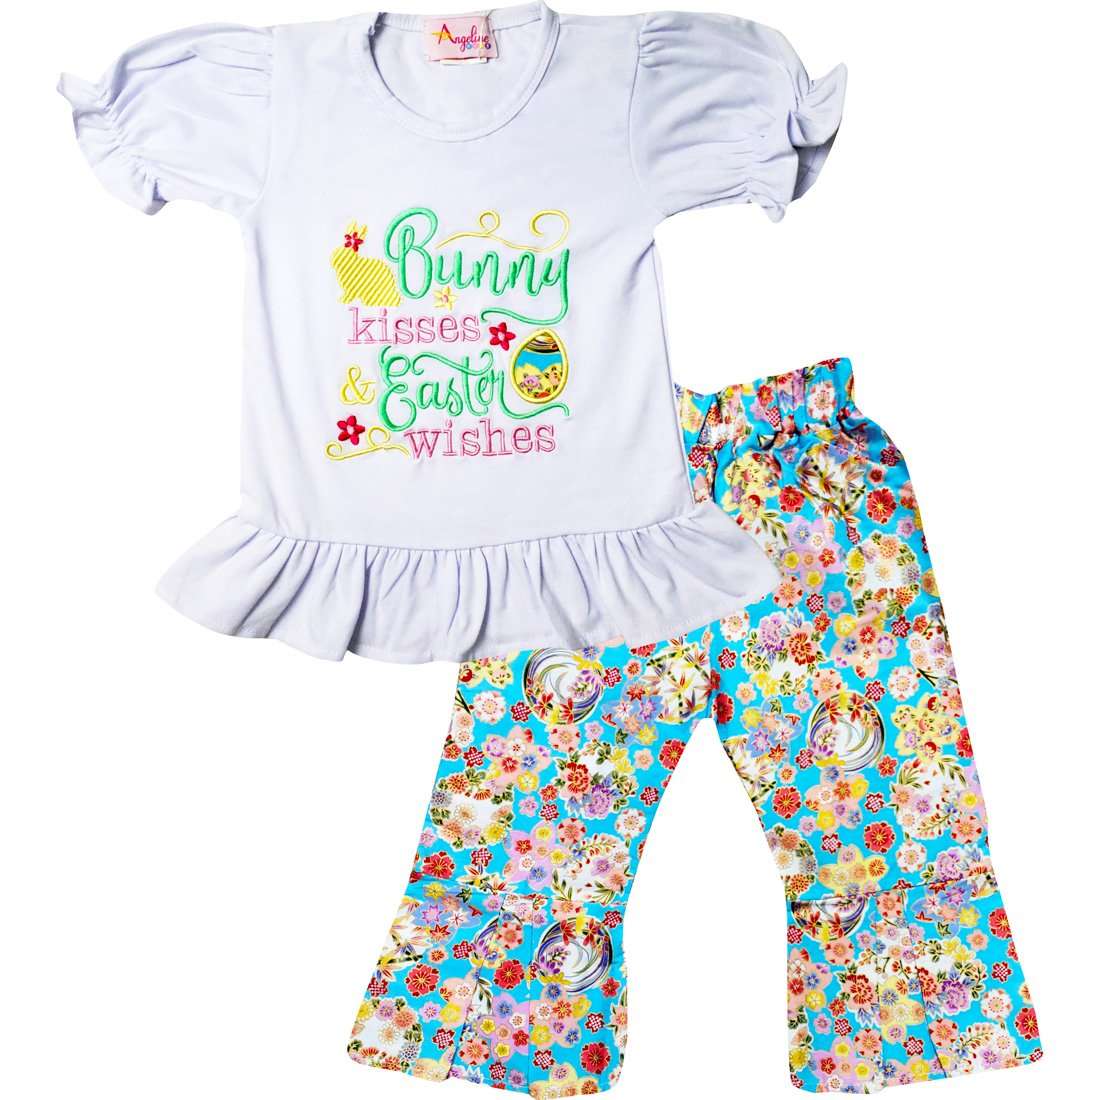 Angeline Kids:Baby Infant Girls Spring Blossom Bunny Kisses Easter Wishes Ruffles Top Pants Set